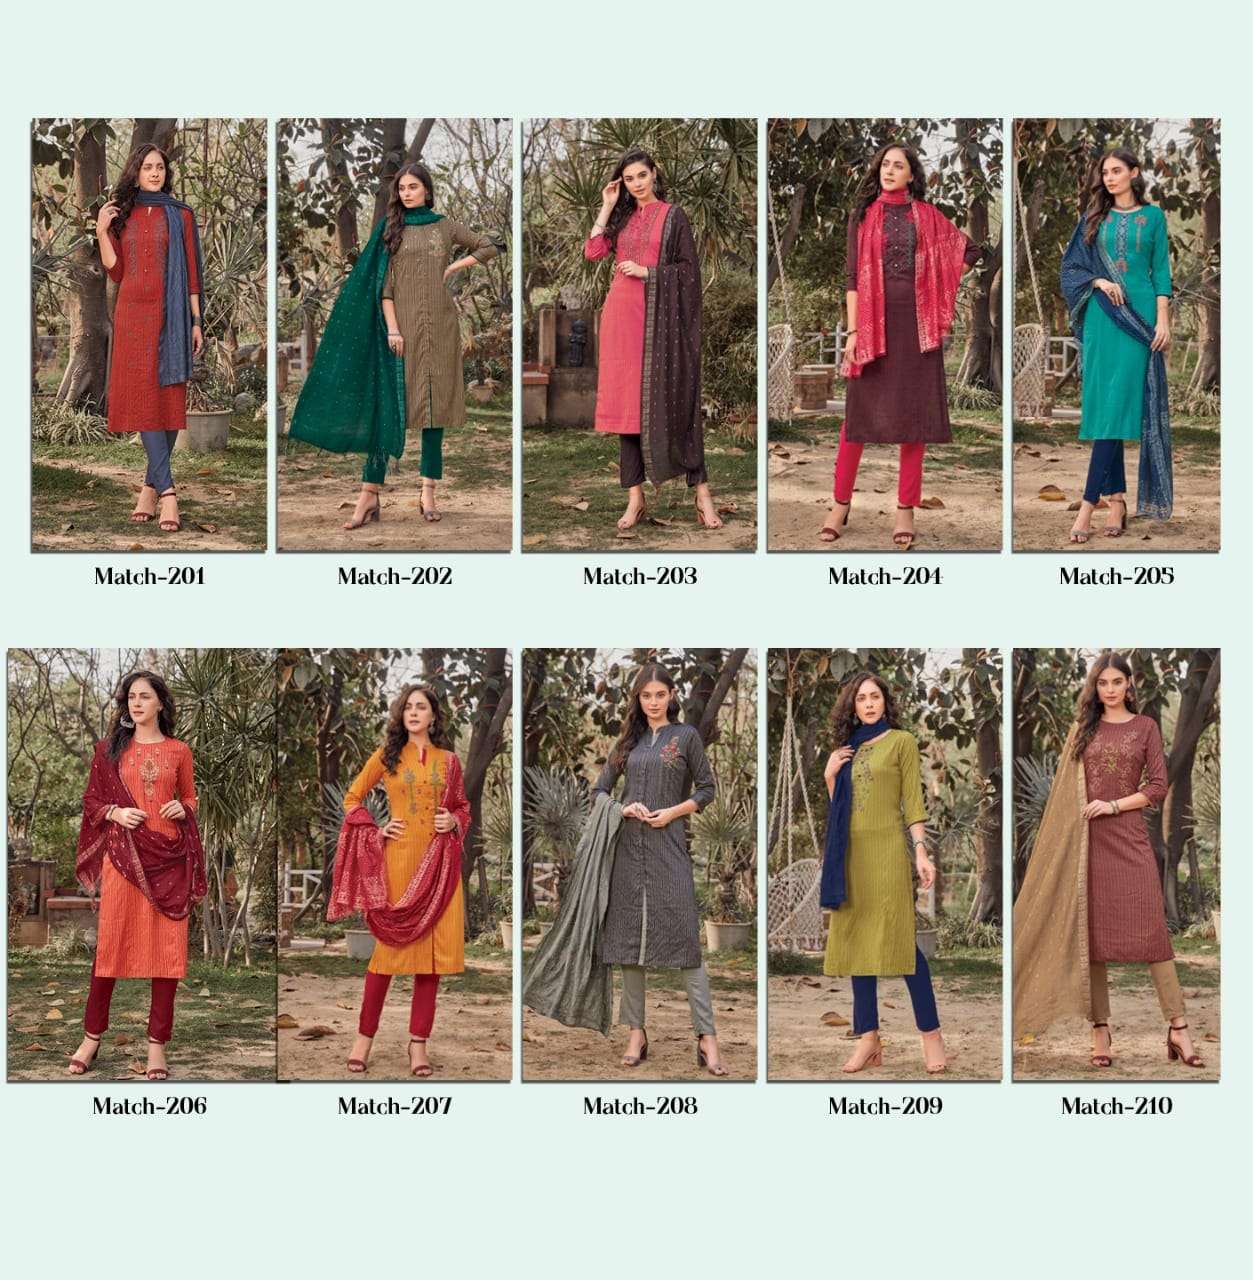 MATCH VOL-2 BY RANGMAYA 201 TO 210 SERIES BEAUTIFUL SUITS COLORFUL STYLISH FANCY CASUAL WEAR & ETHNIC WEAR RAYON DRESSES AT WHOLESALE PRICE